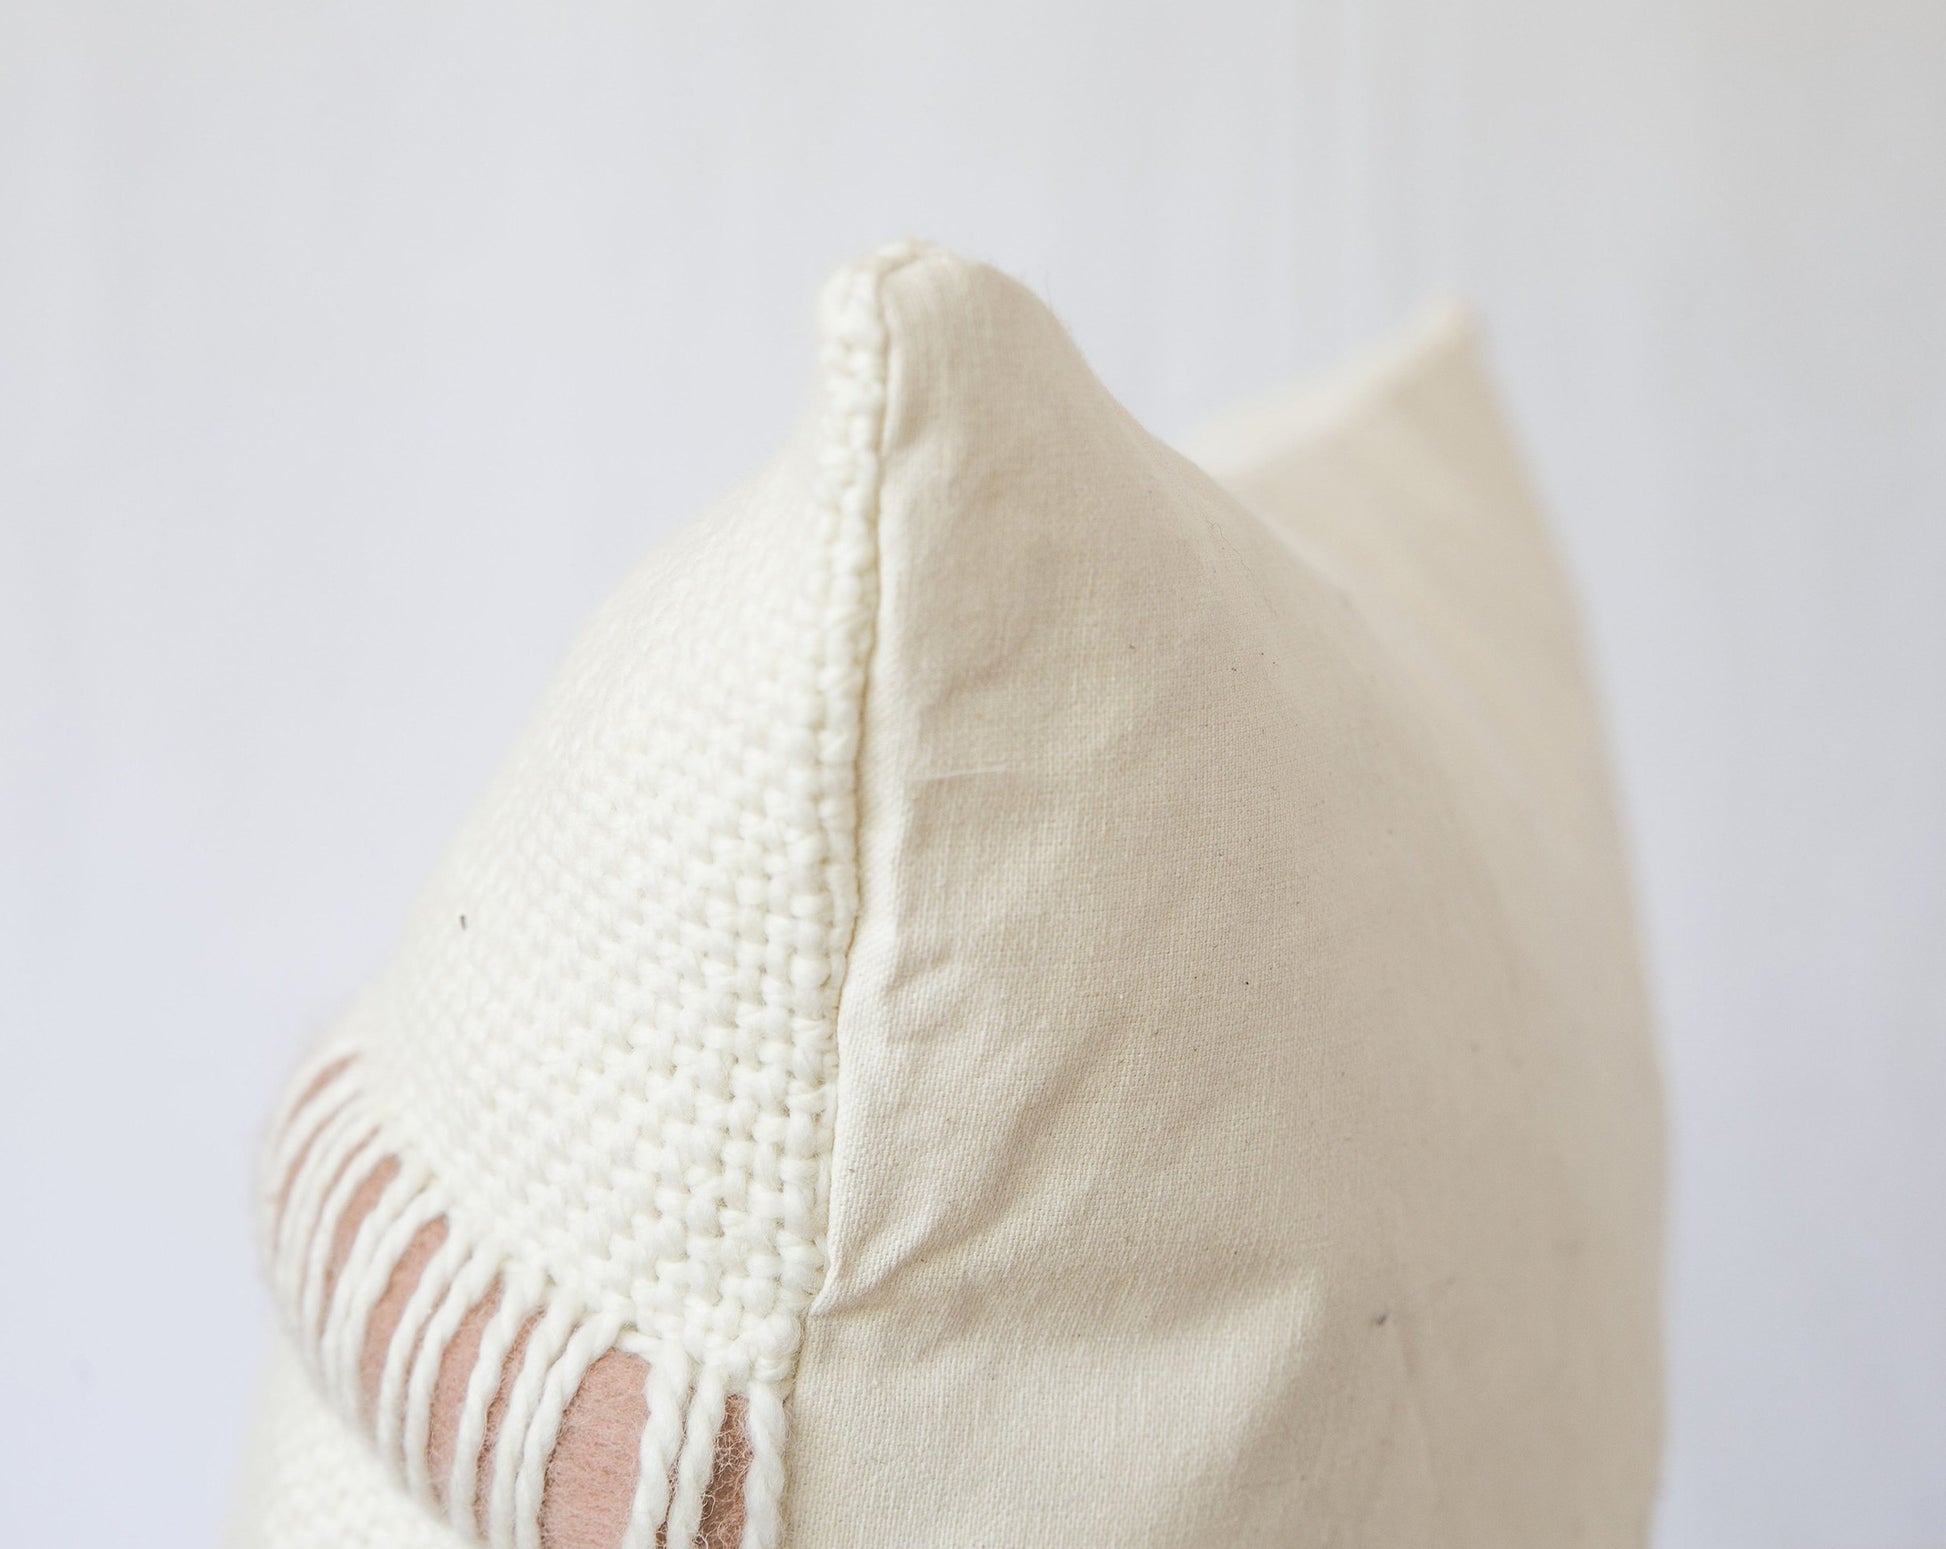 Front and back pillow cover handwoven in merino wool textured stripes